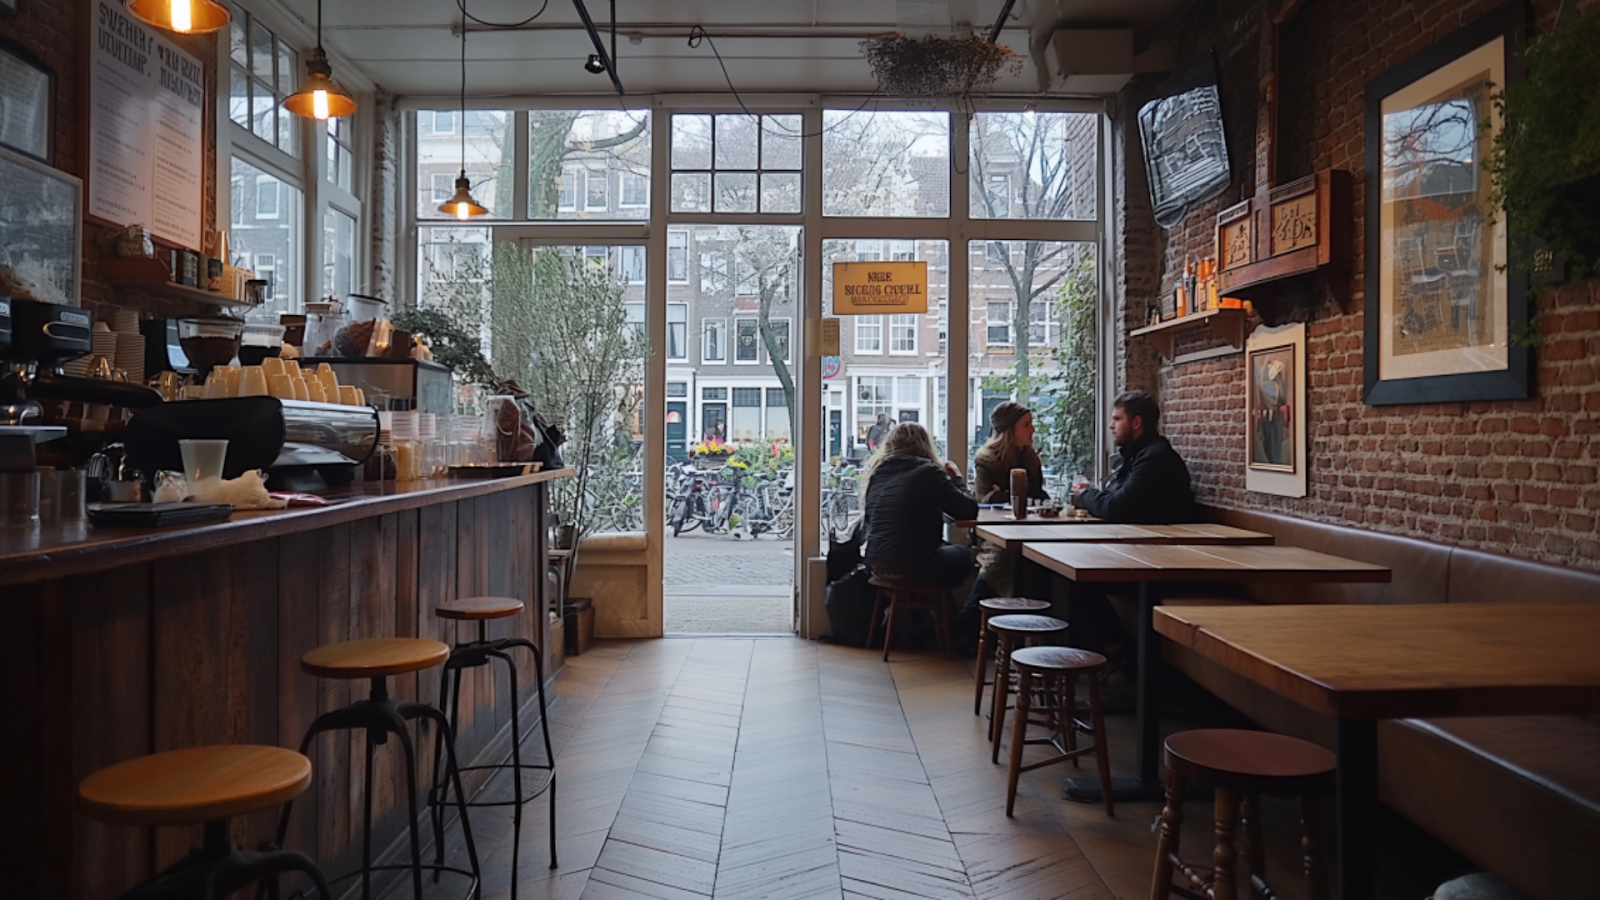 Interior of a cozy Dutch café in Amsterdam with customers enjoying coffee and stroopwafels.